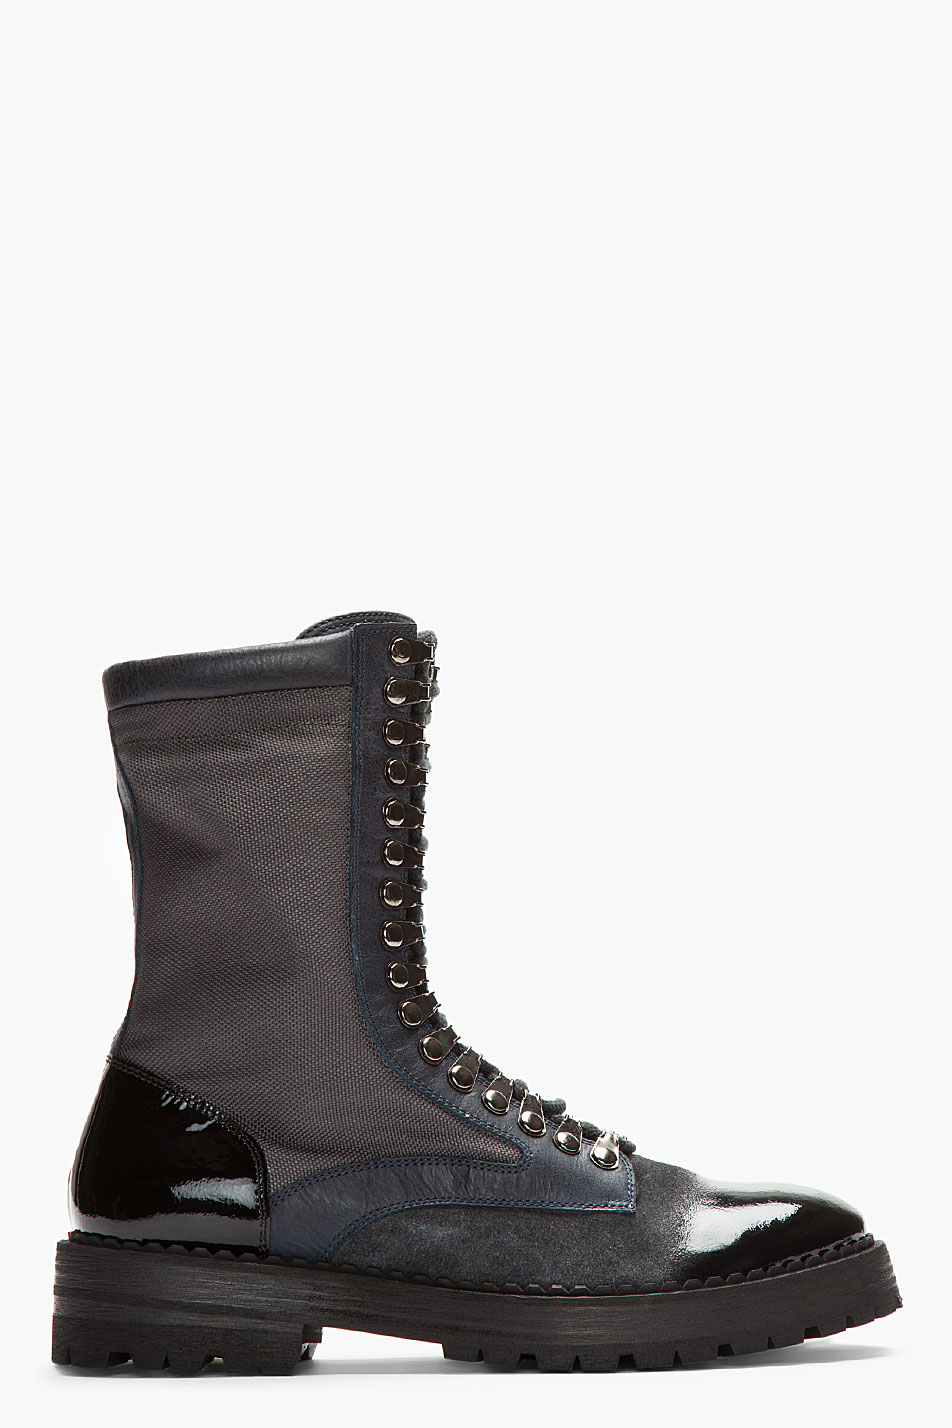 McQ Black Textile and Leather Wet_look Combat Boots for Men - Lyst